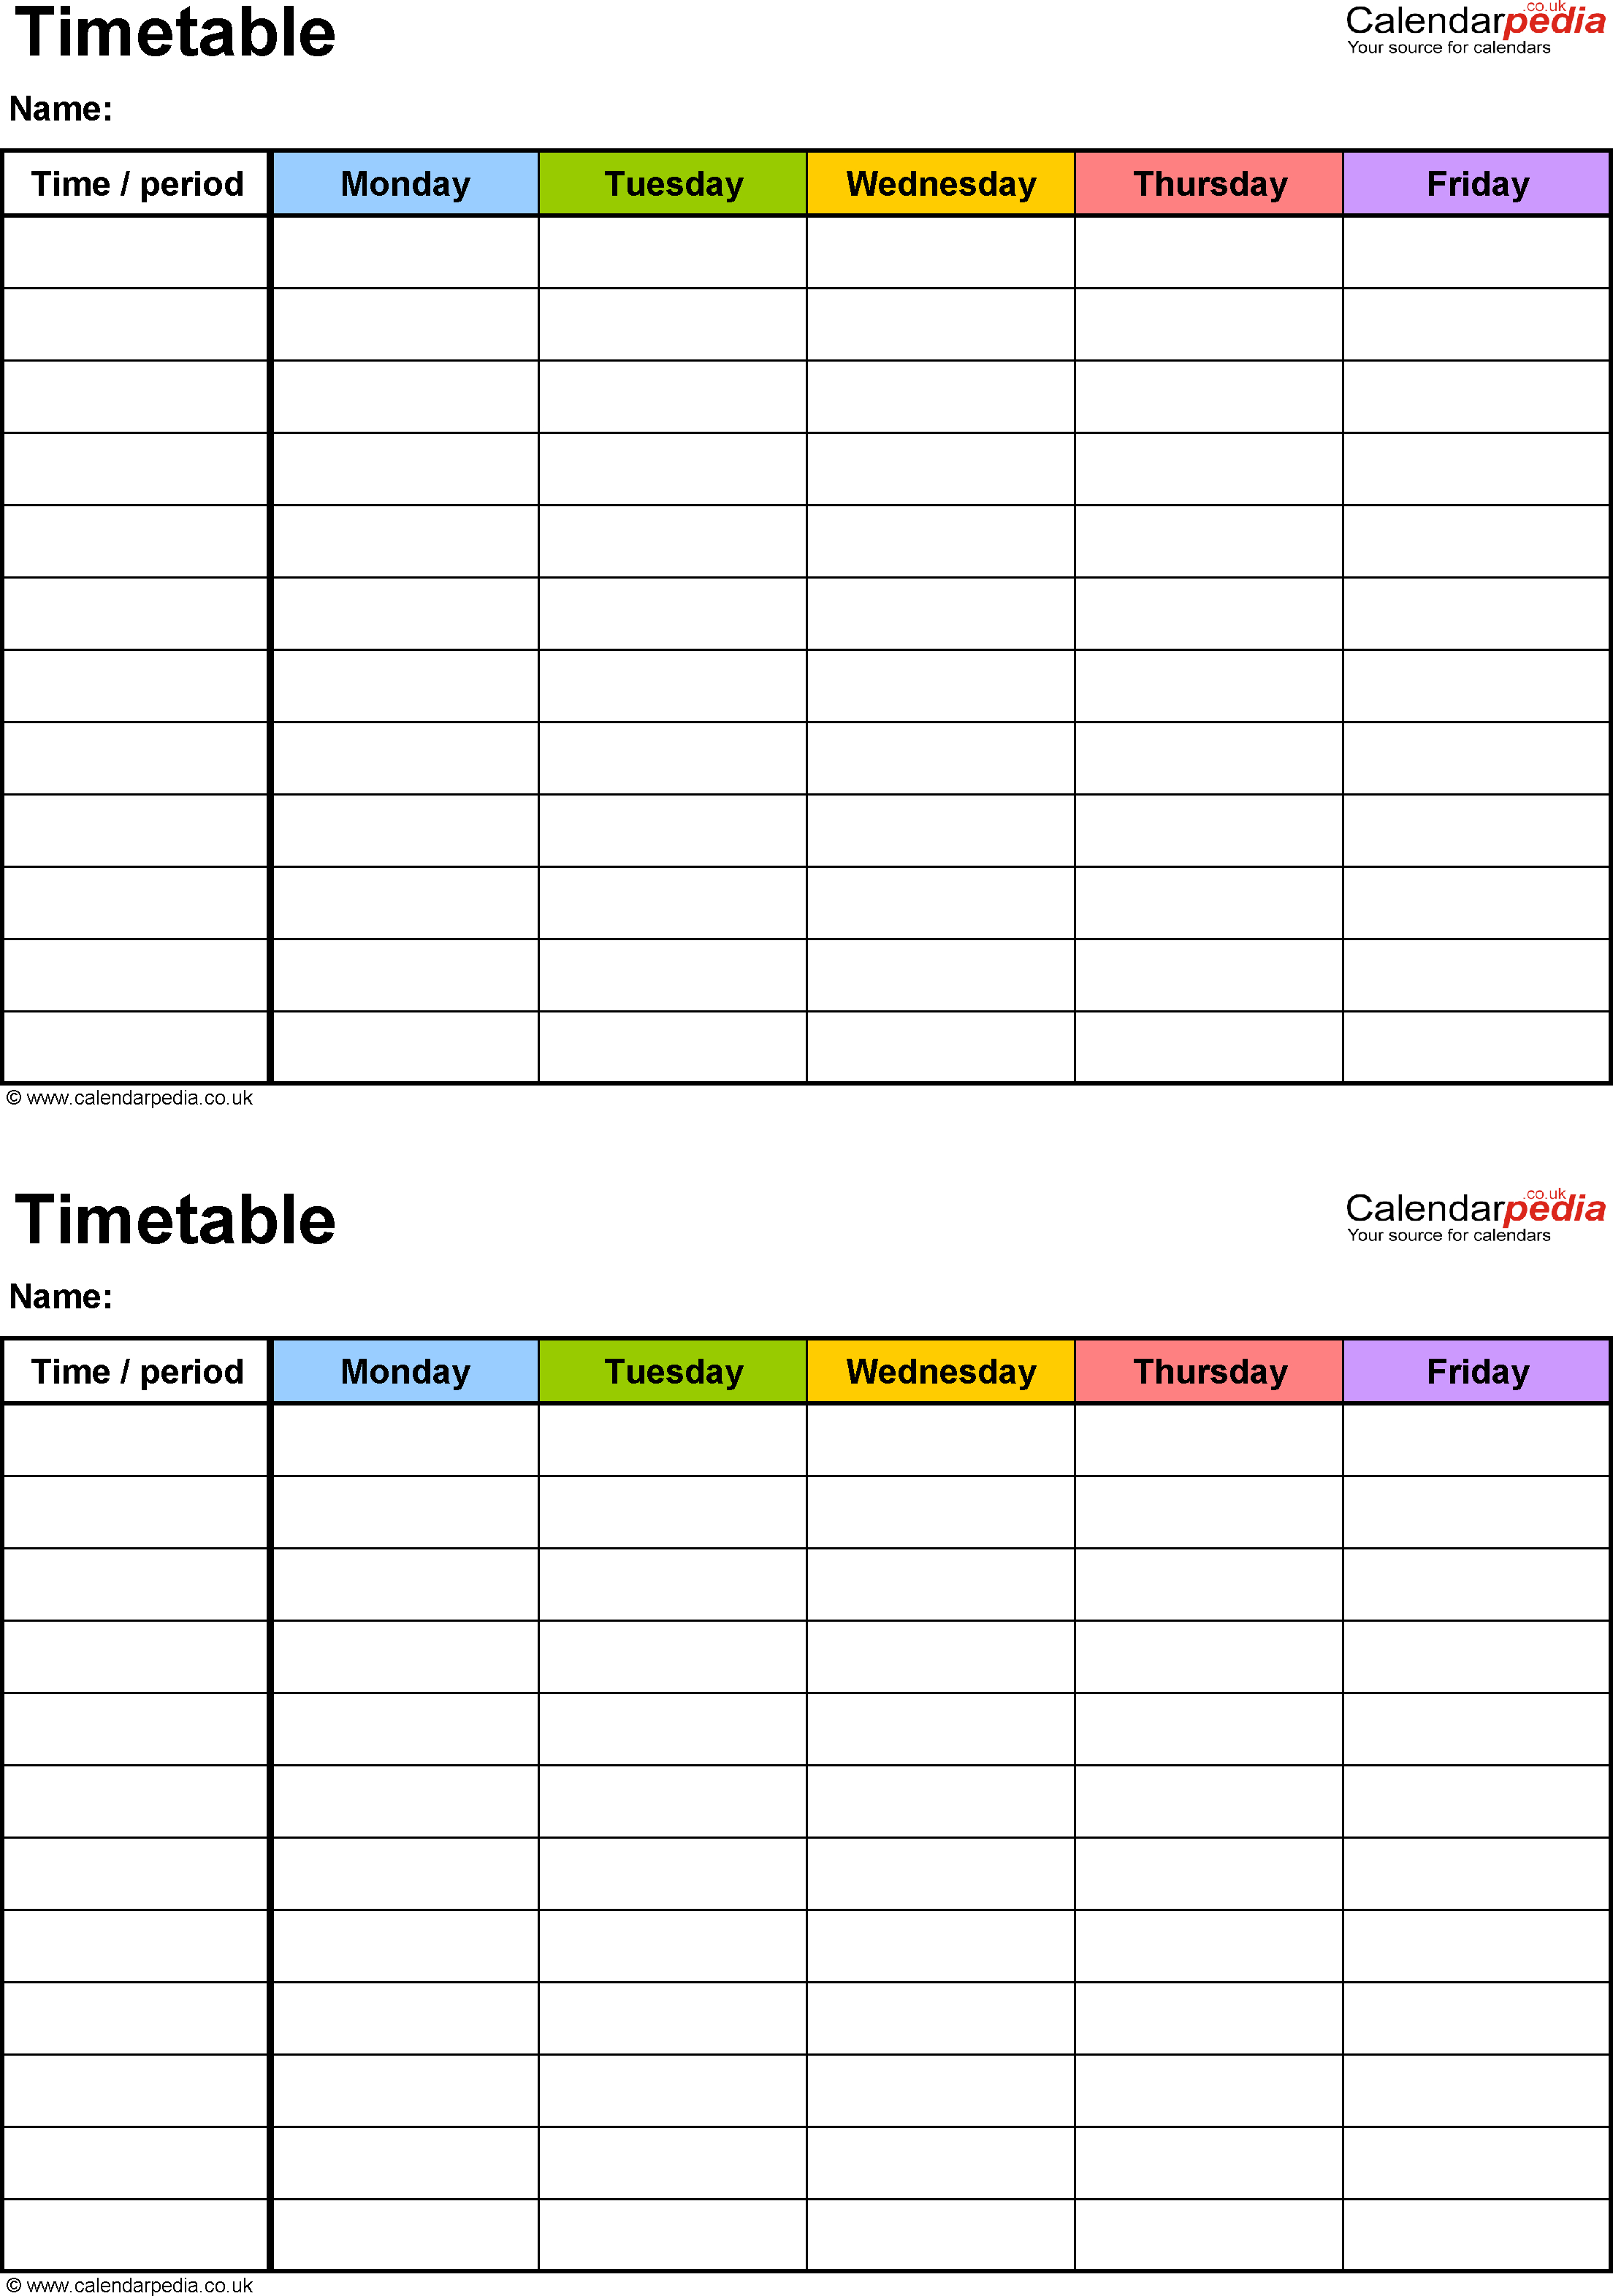 Excel Timetable Template 6: 2 A5 Timetables On One Page within 5 Day Weekly Planner Template